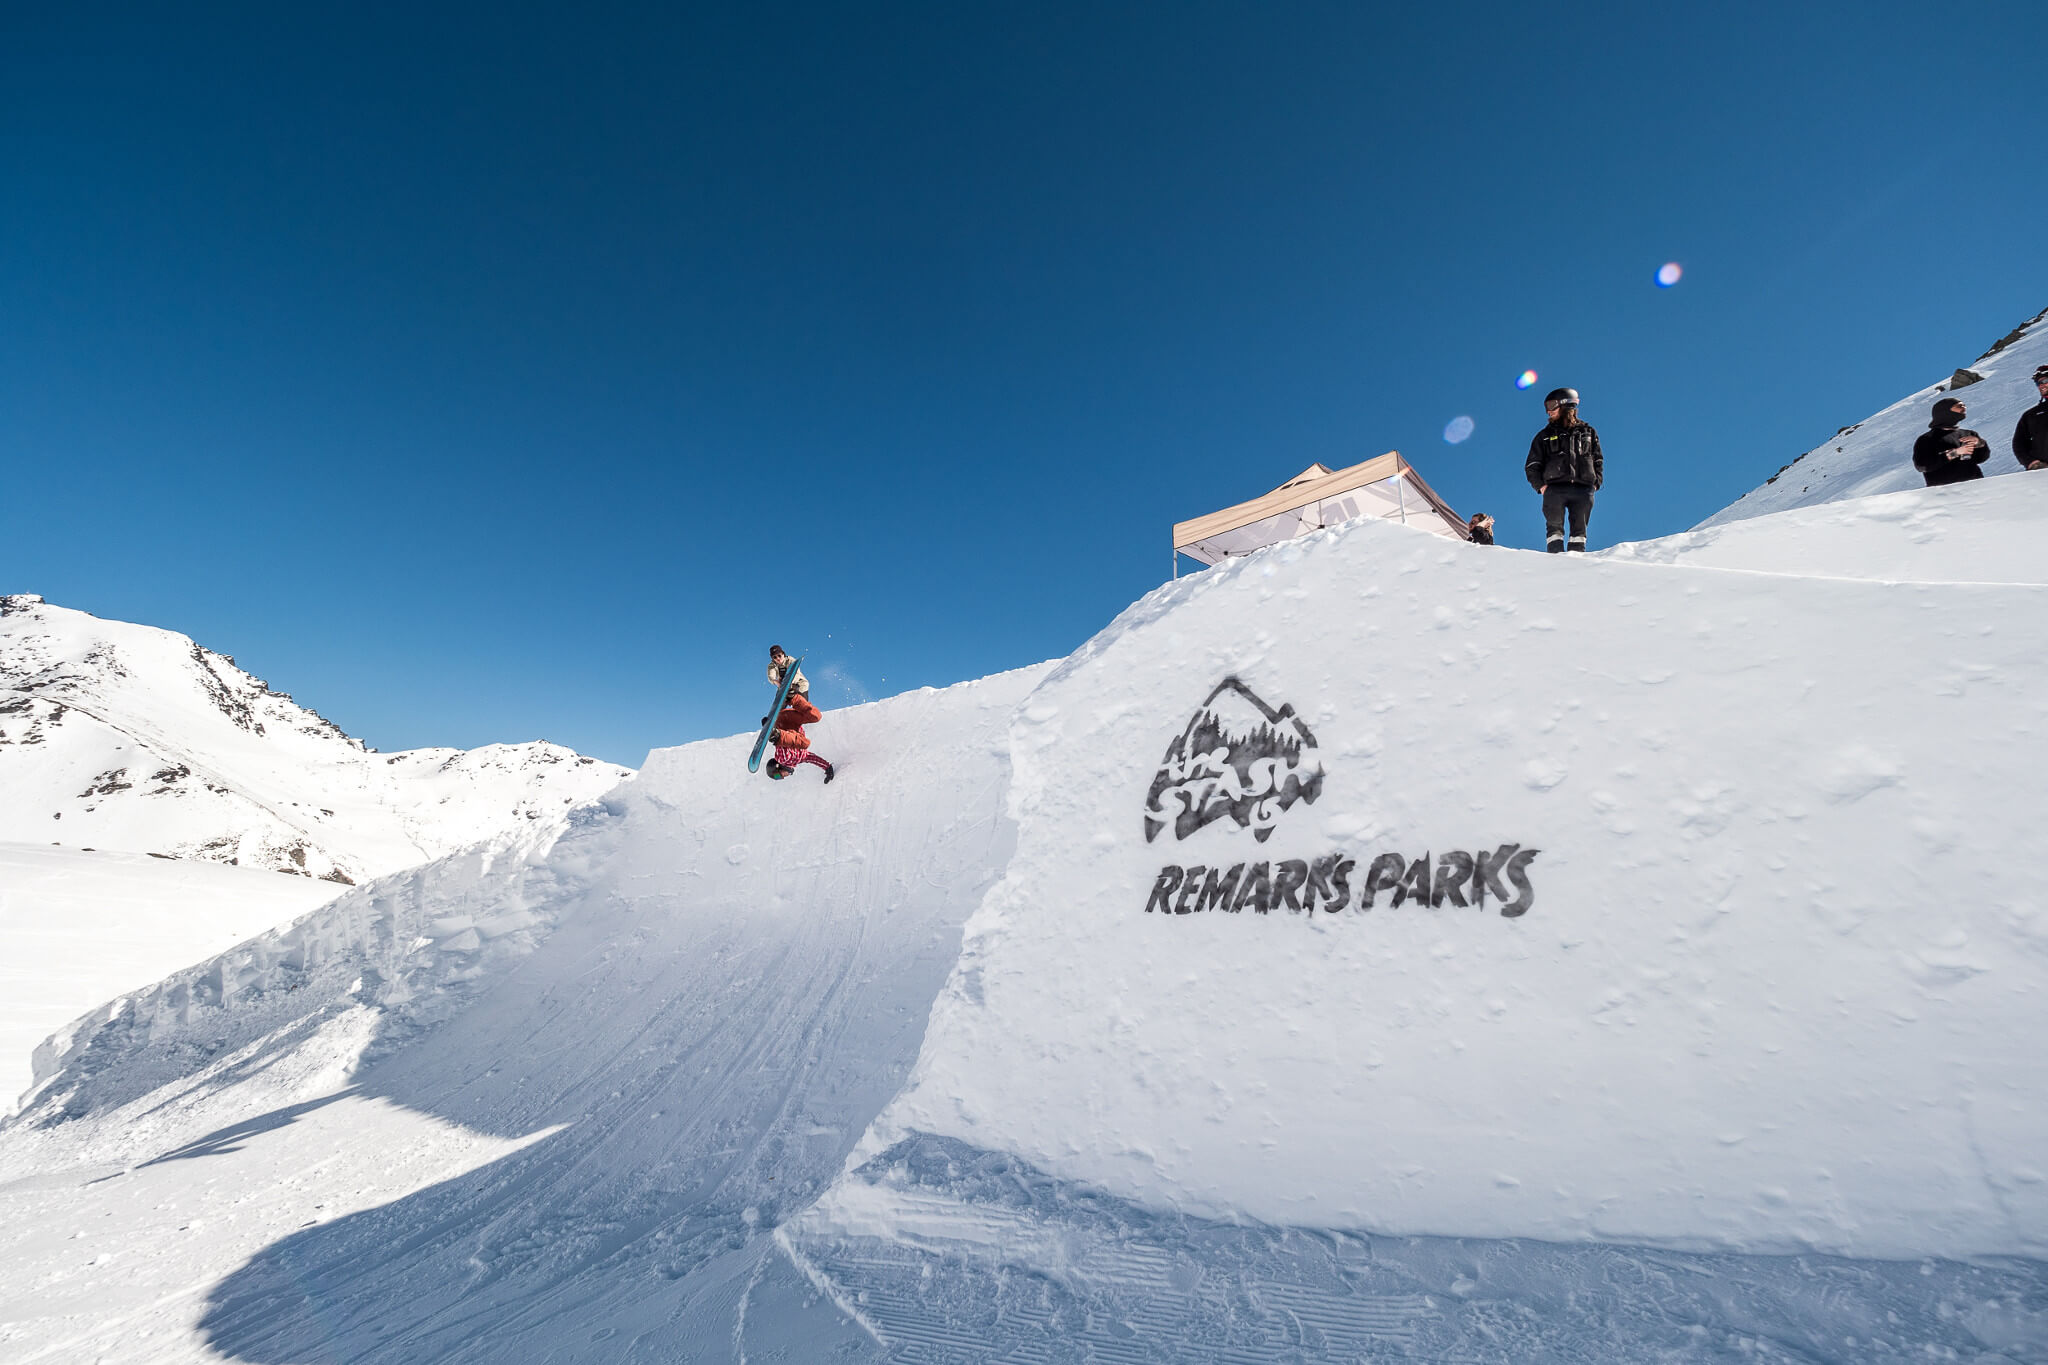 Snowboarder hitting a jump at The Remarkables ski resort in New Zealand, Southern Hemisphere